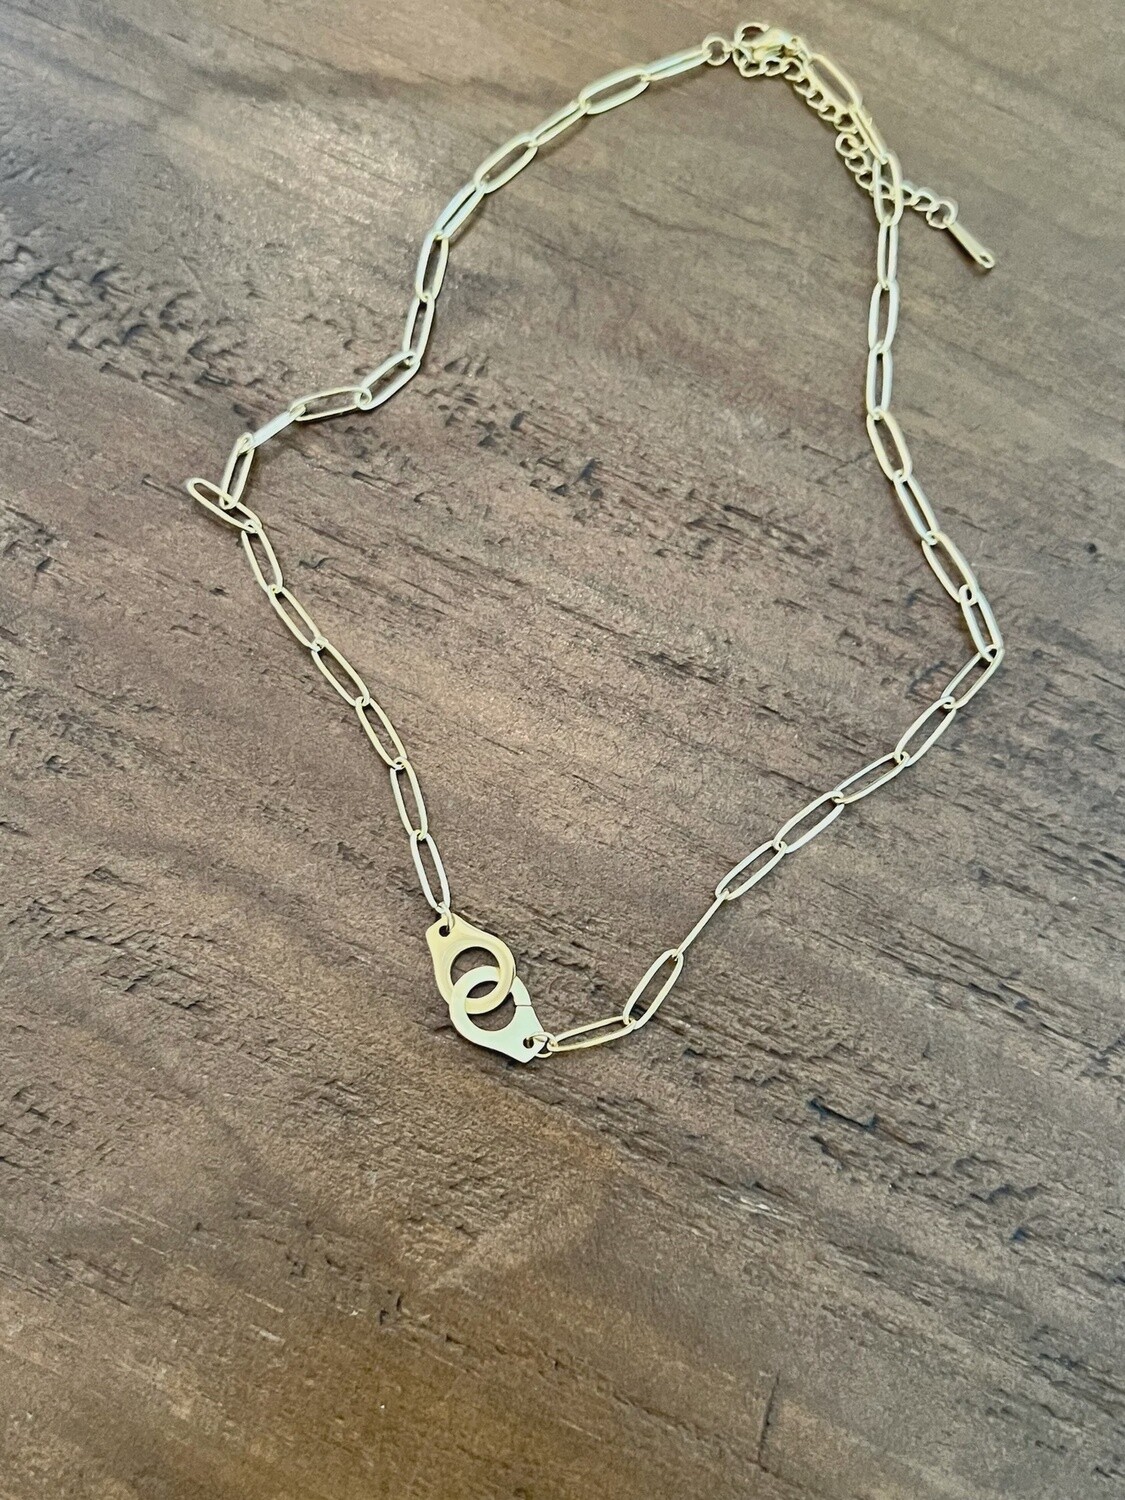 Handcuff Paperclip Necklace Silver